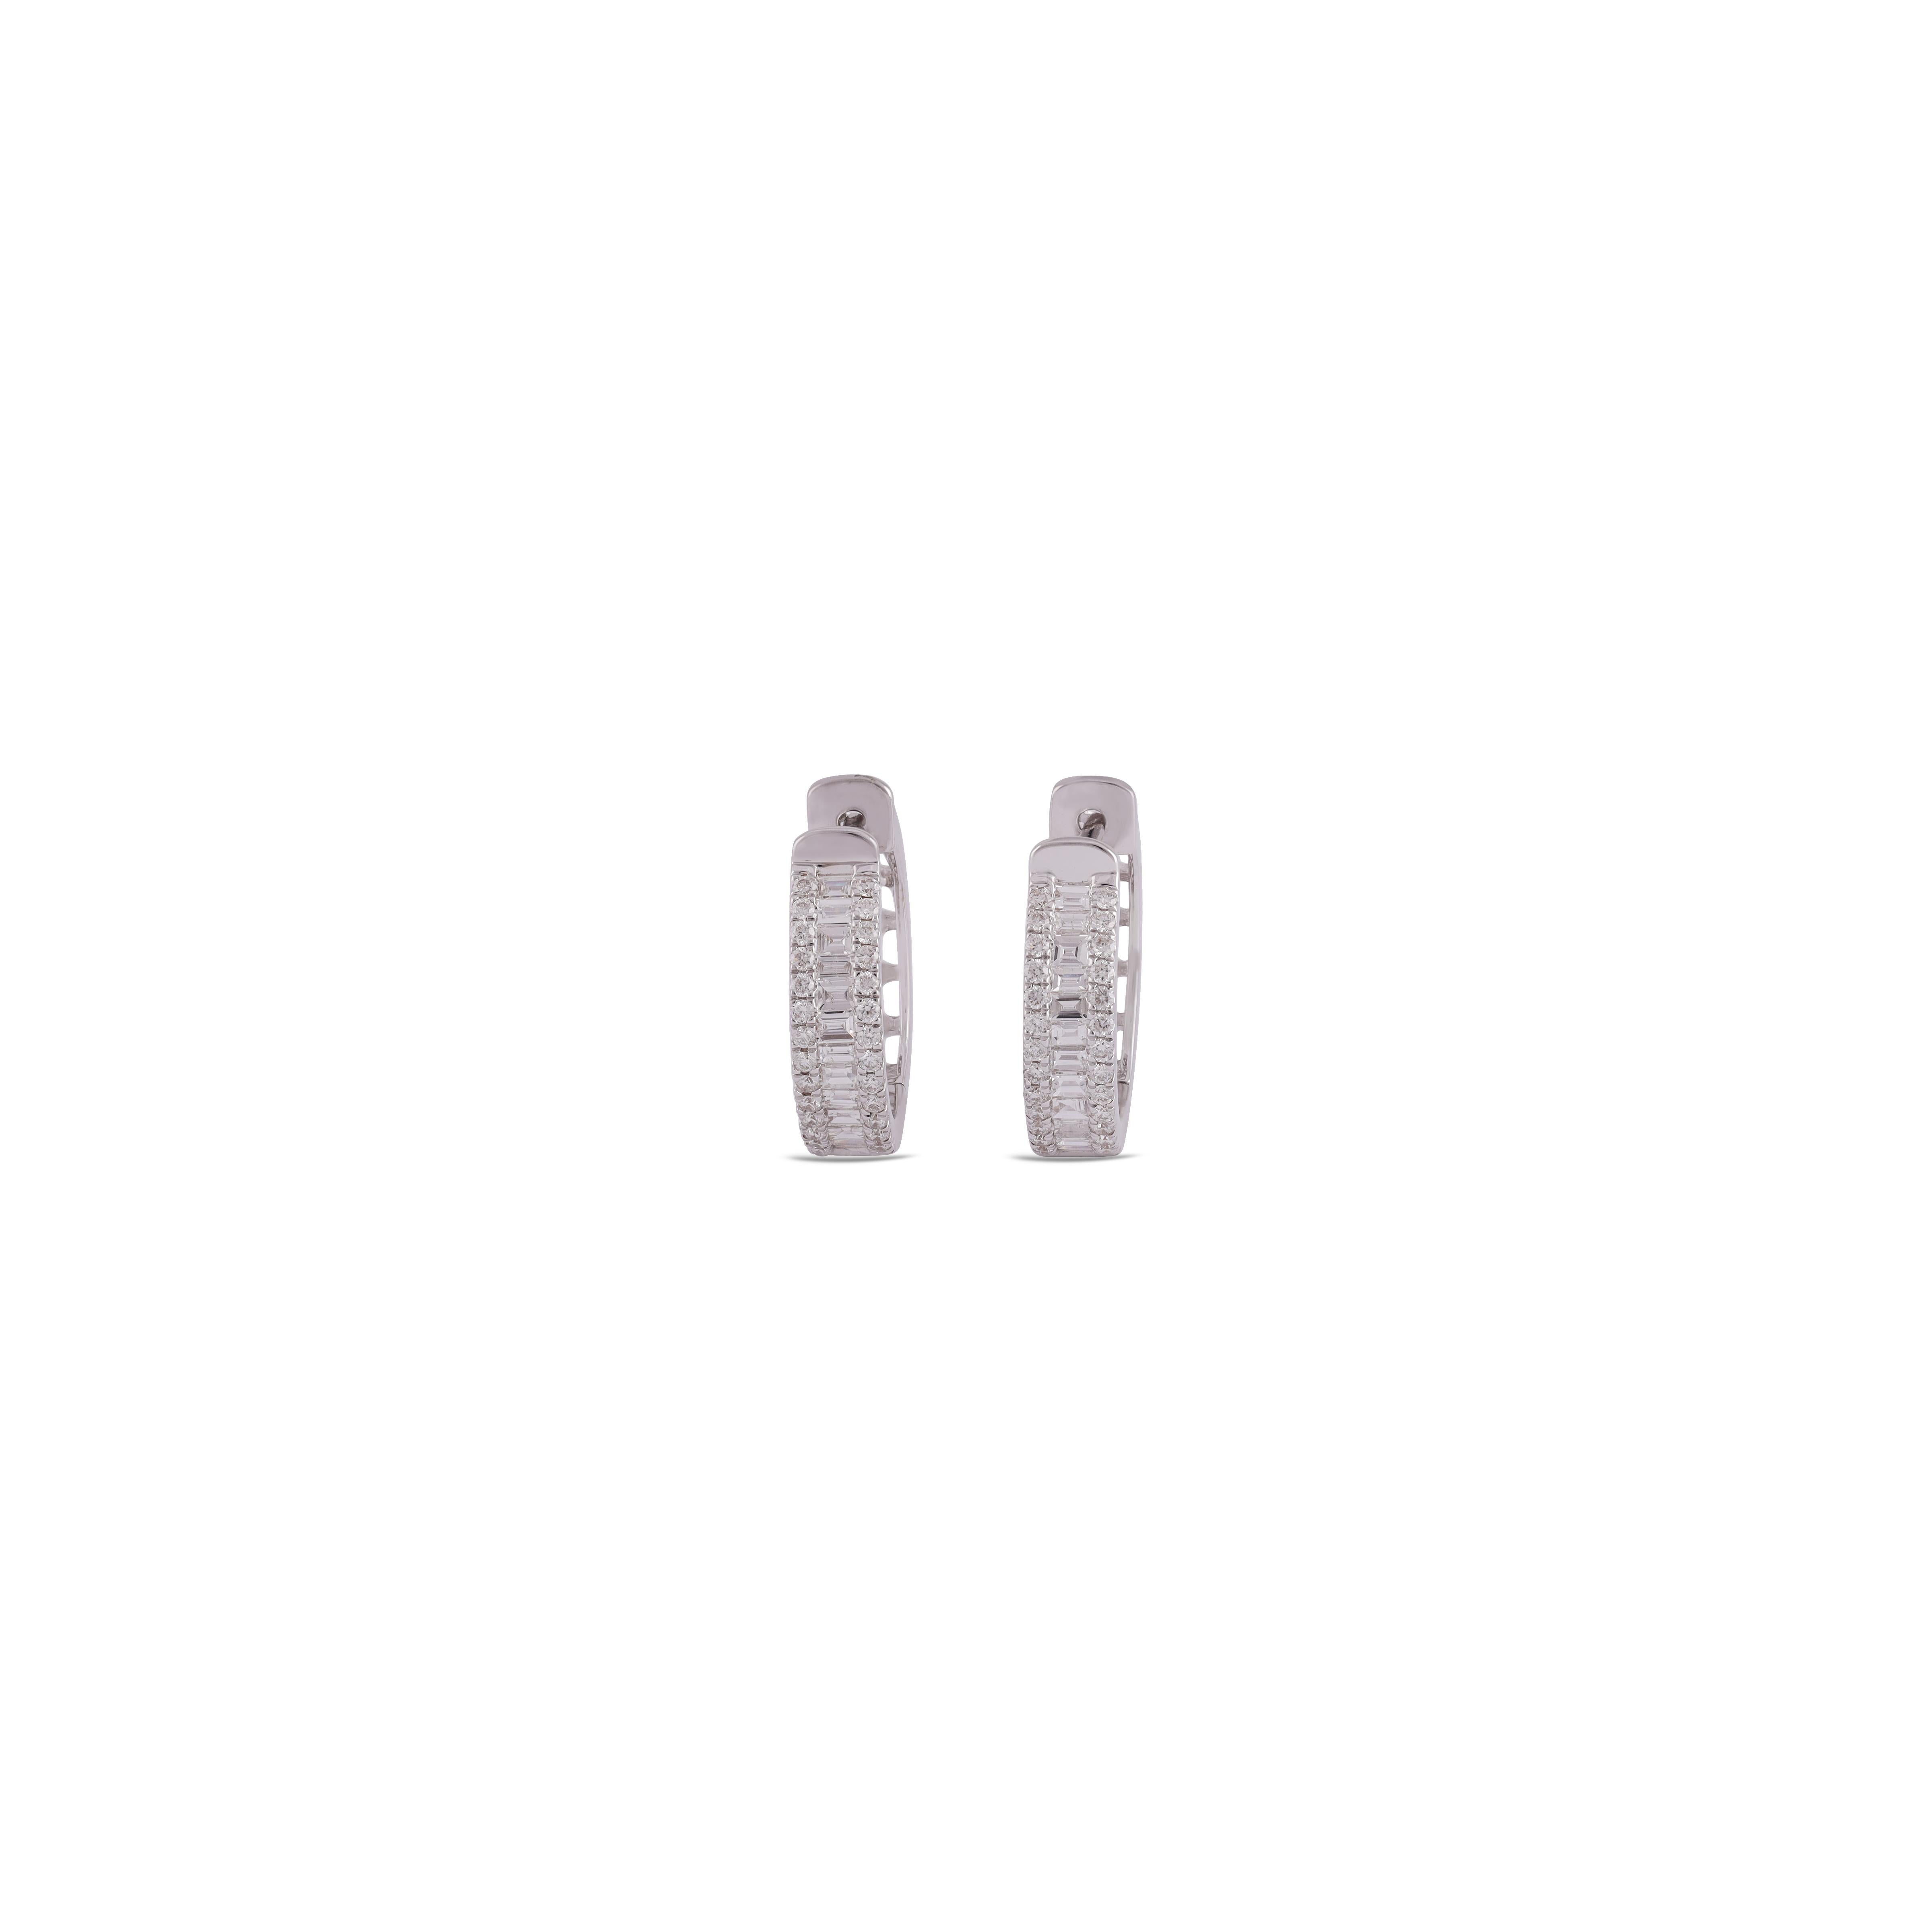 These are an exclusive earrings wit diamonds features round  of diamonds weight 0.85 carats, These entire earrings are studded in 18k White gold, earrings have a Lever-Back mechanism. 